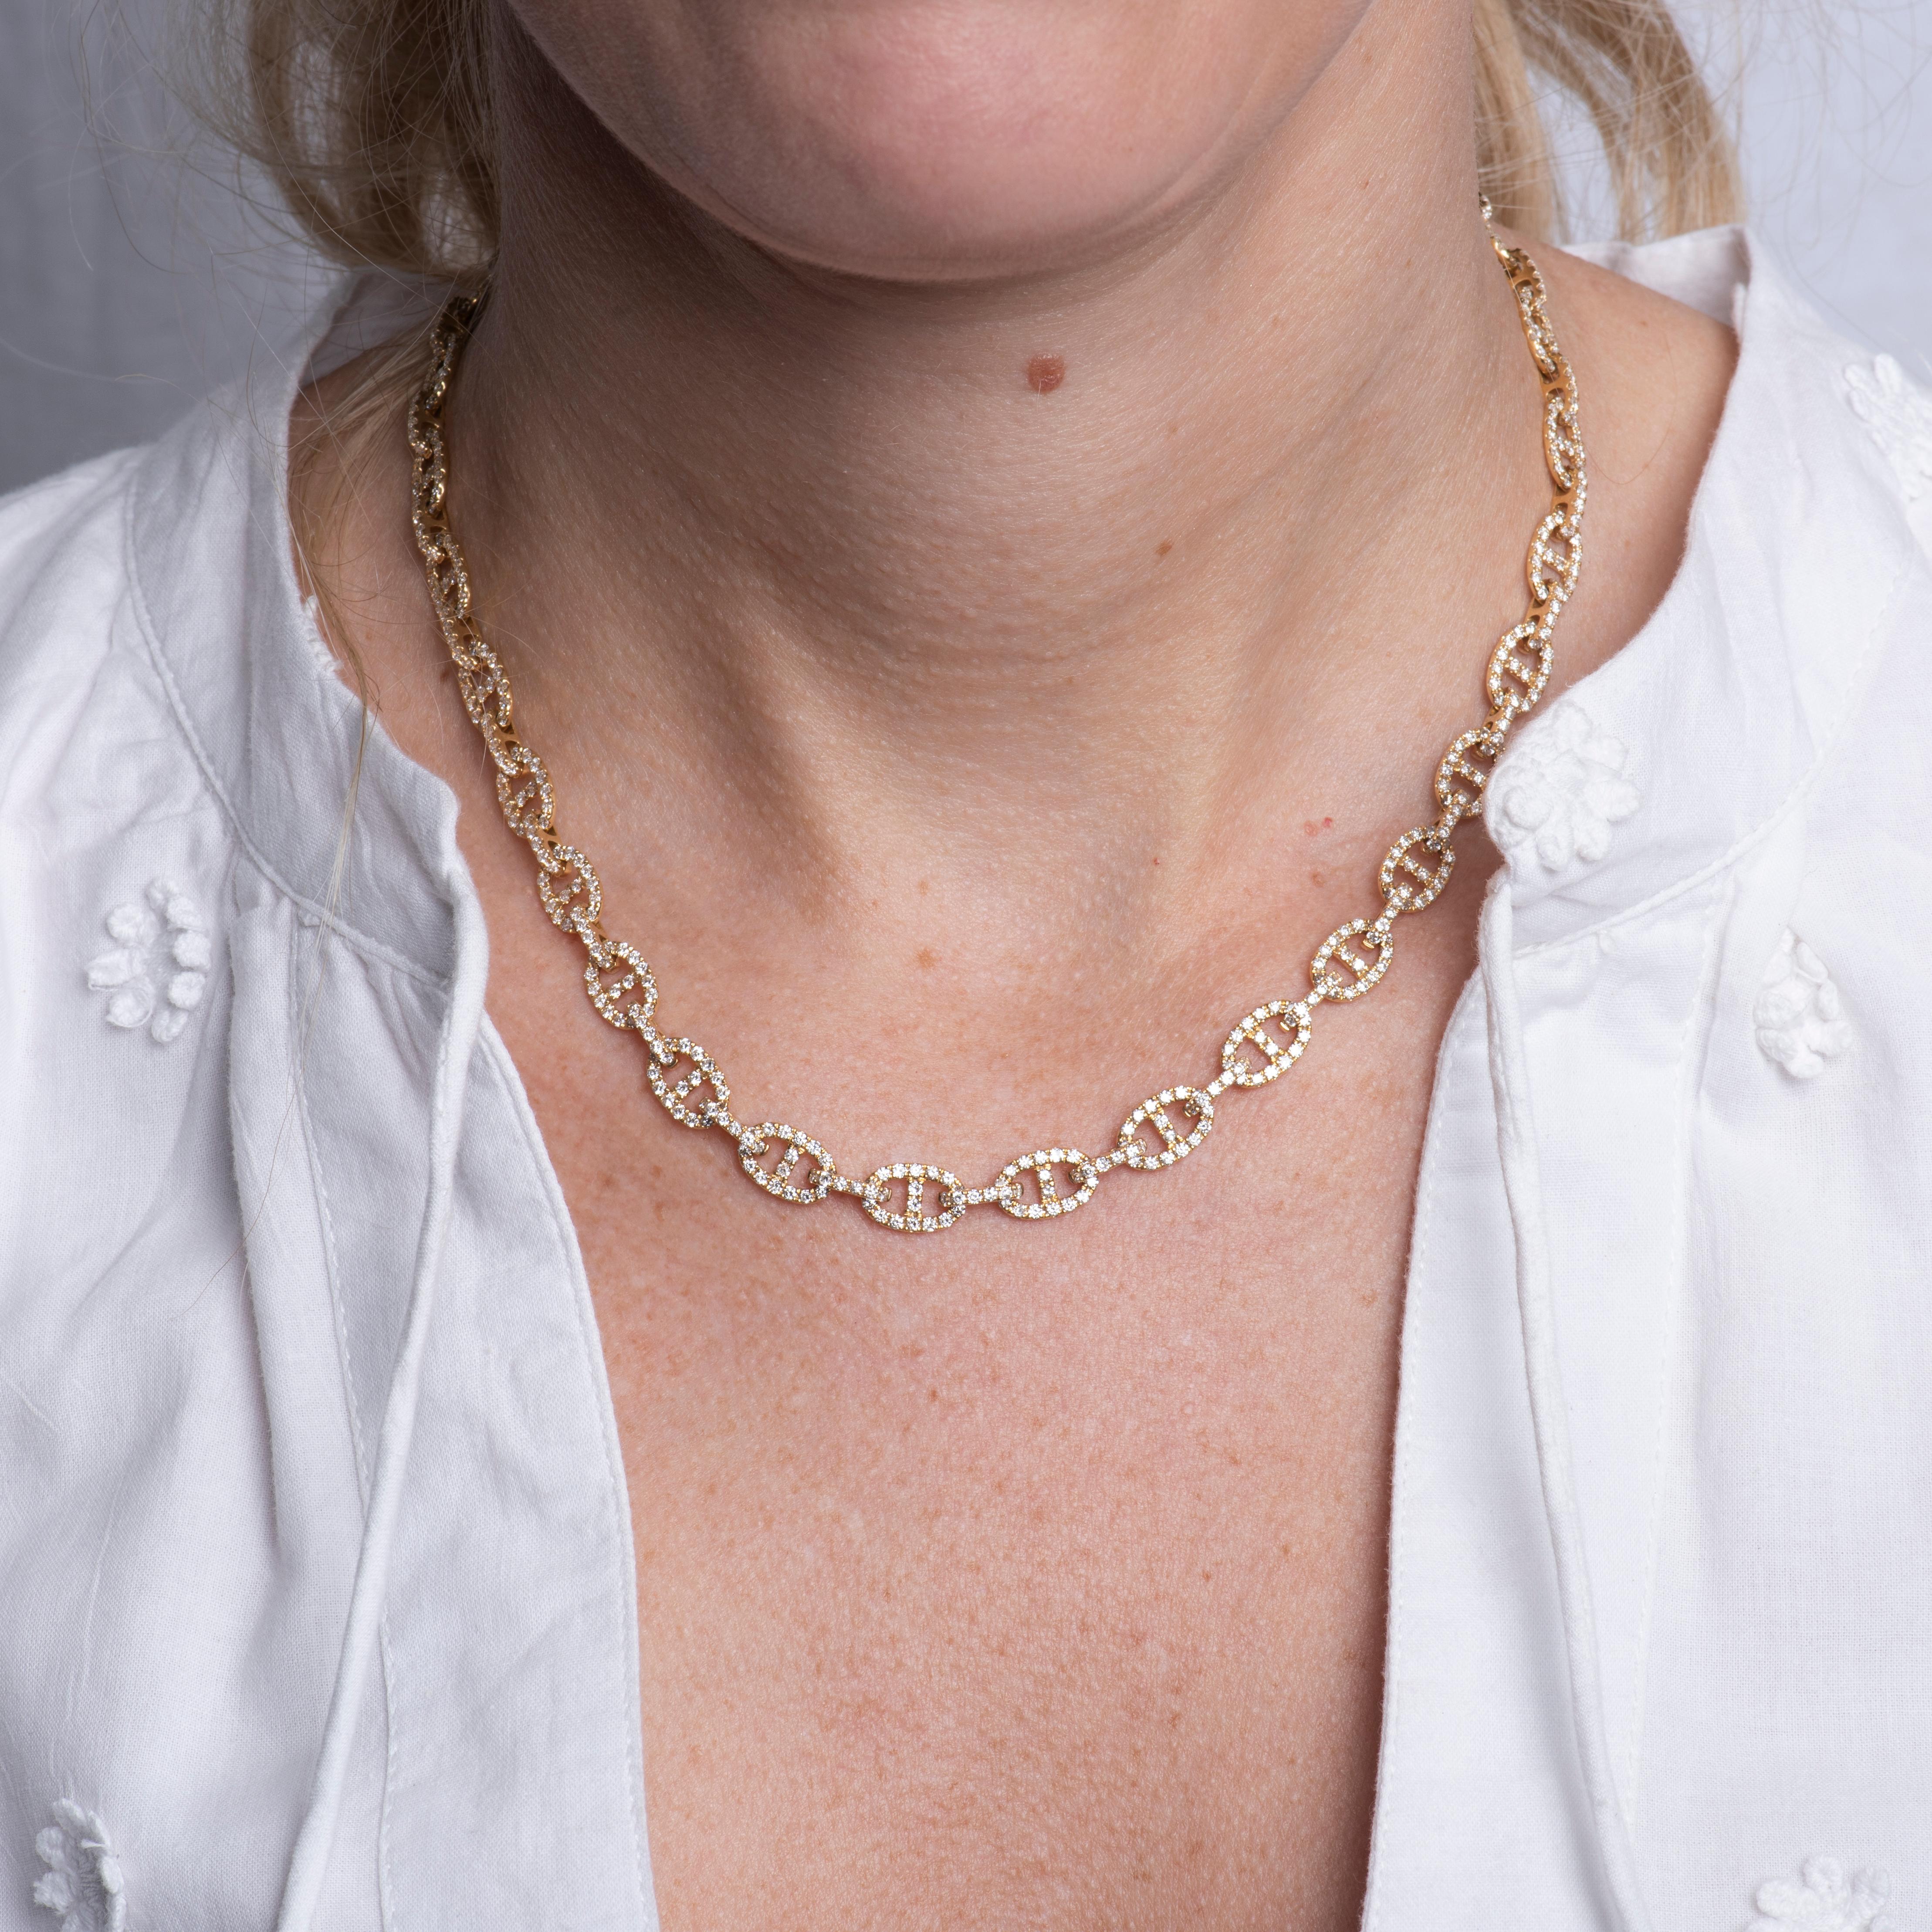 This link necklace features 6.22 carat total weight in round natural diamonds set in 18 karat yellow gold. Box clasp with safety closure. Wear alone of layer with other necklaces for a unique look. 
Measurements: Length approximately 16